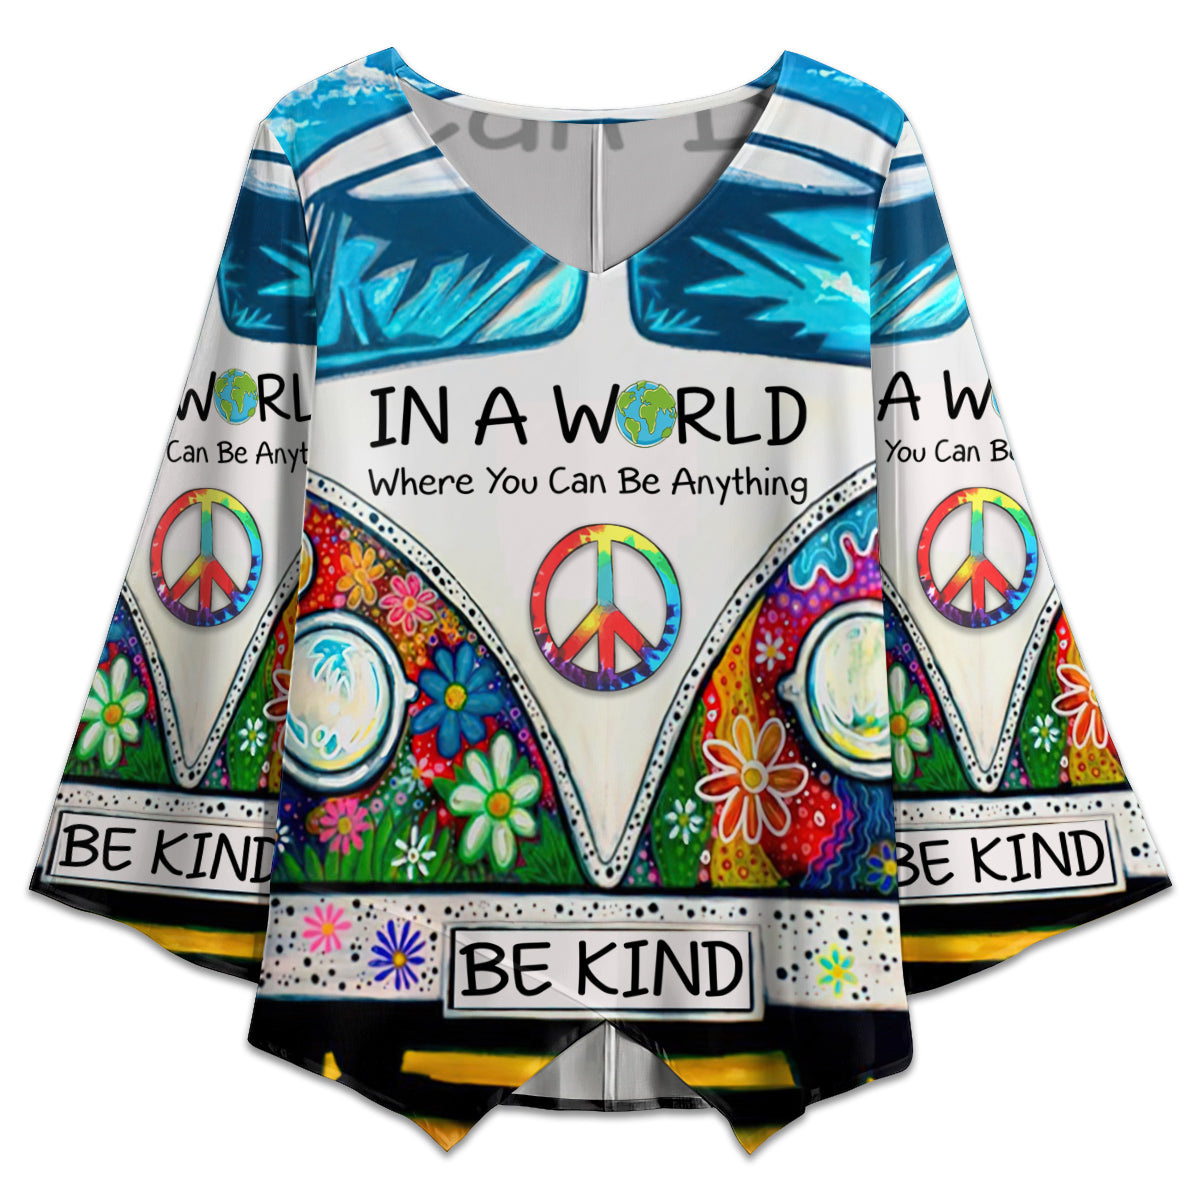 S Hippie In A World Where You Can Be Anything Be Kind - V-neck T-shirt - Owls Matrix LTD